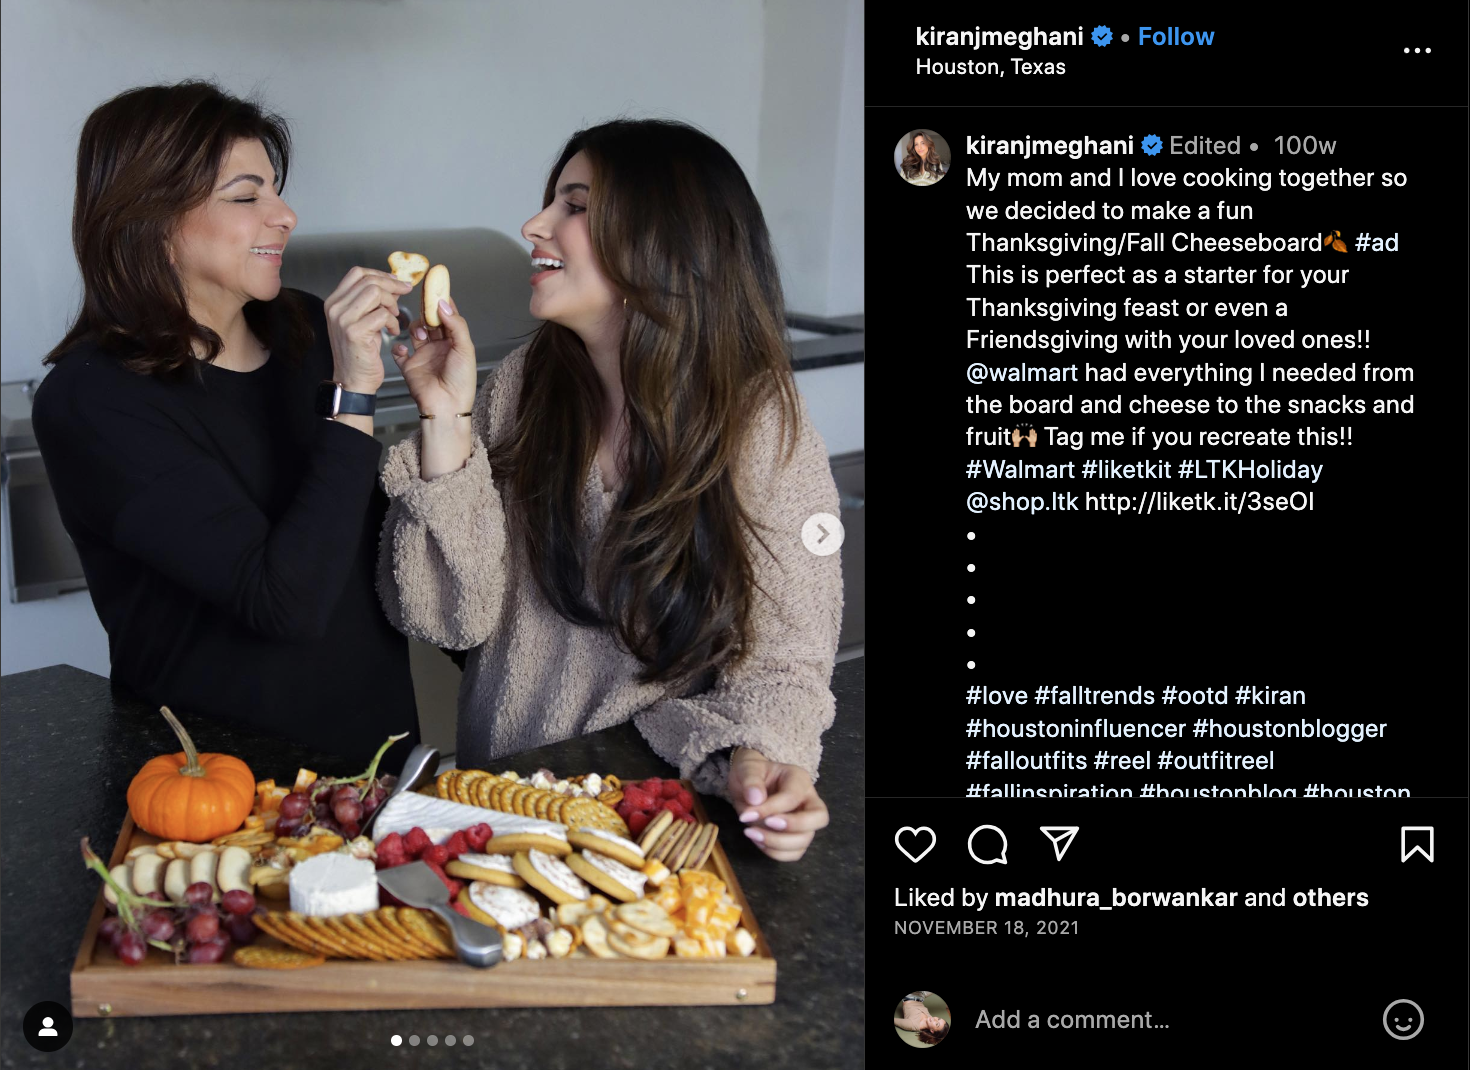 Mother and daughter influencers cheersing crackers as they stand behind their Thanksgiving cheese board